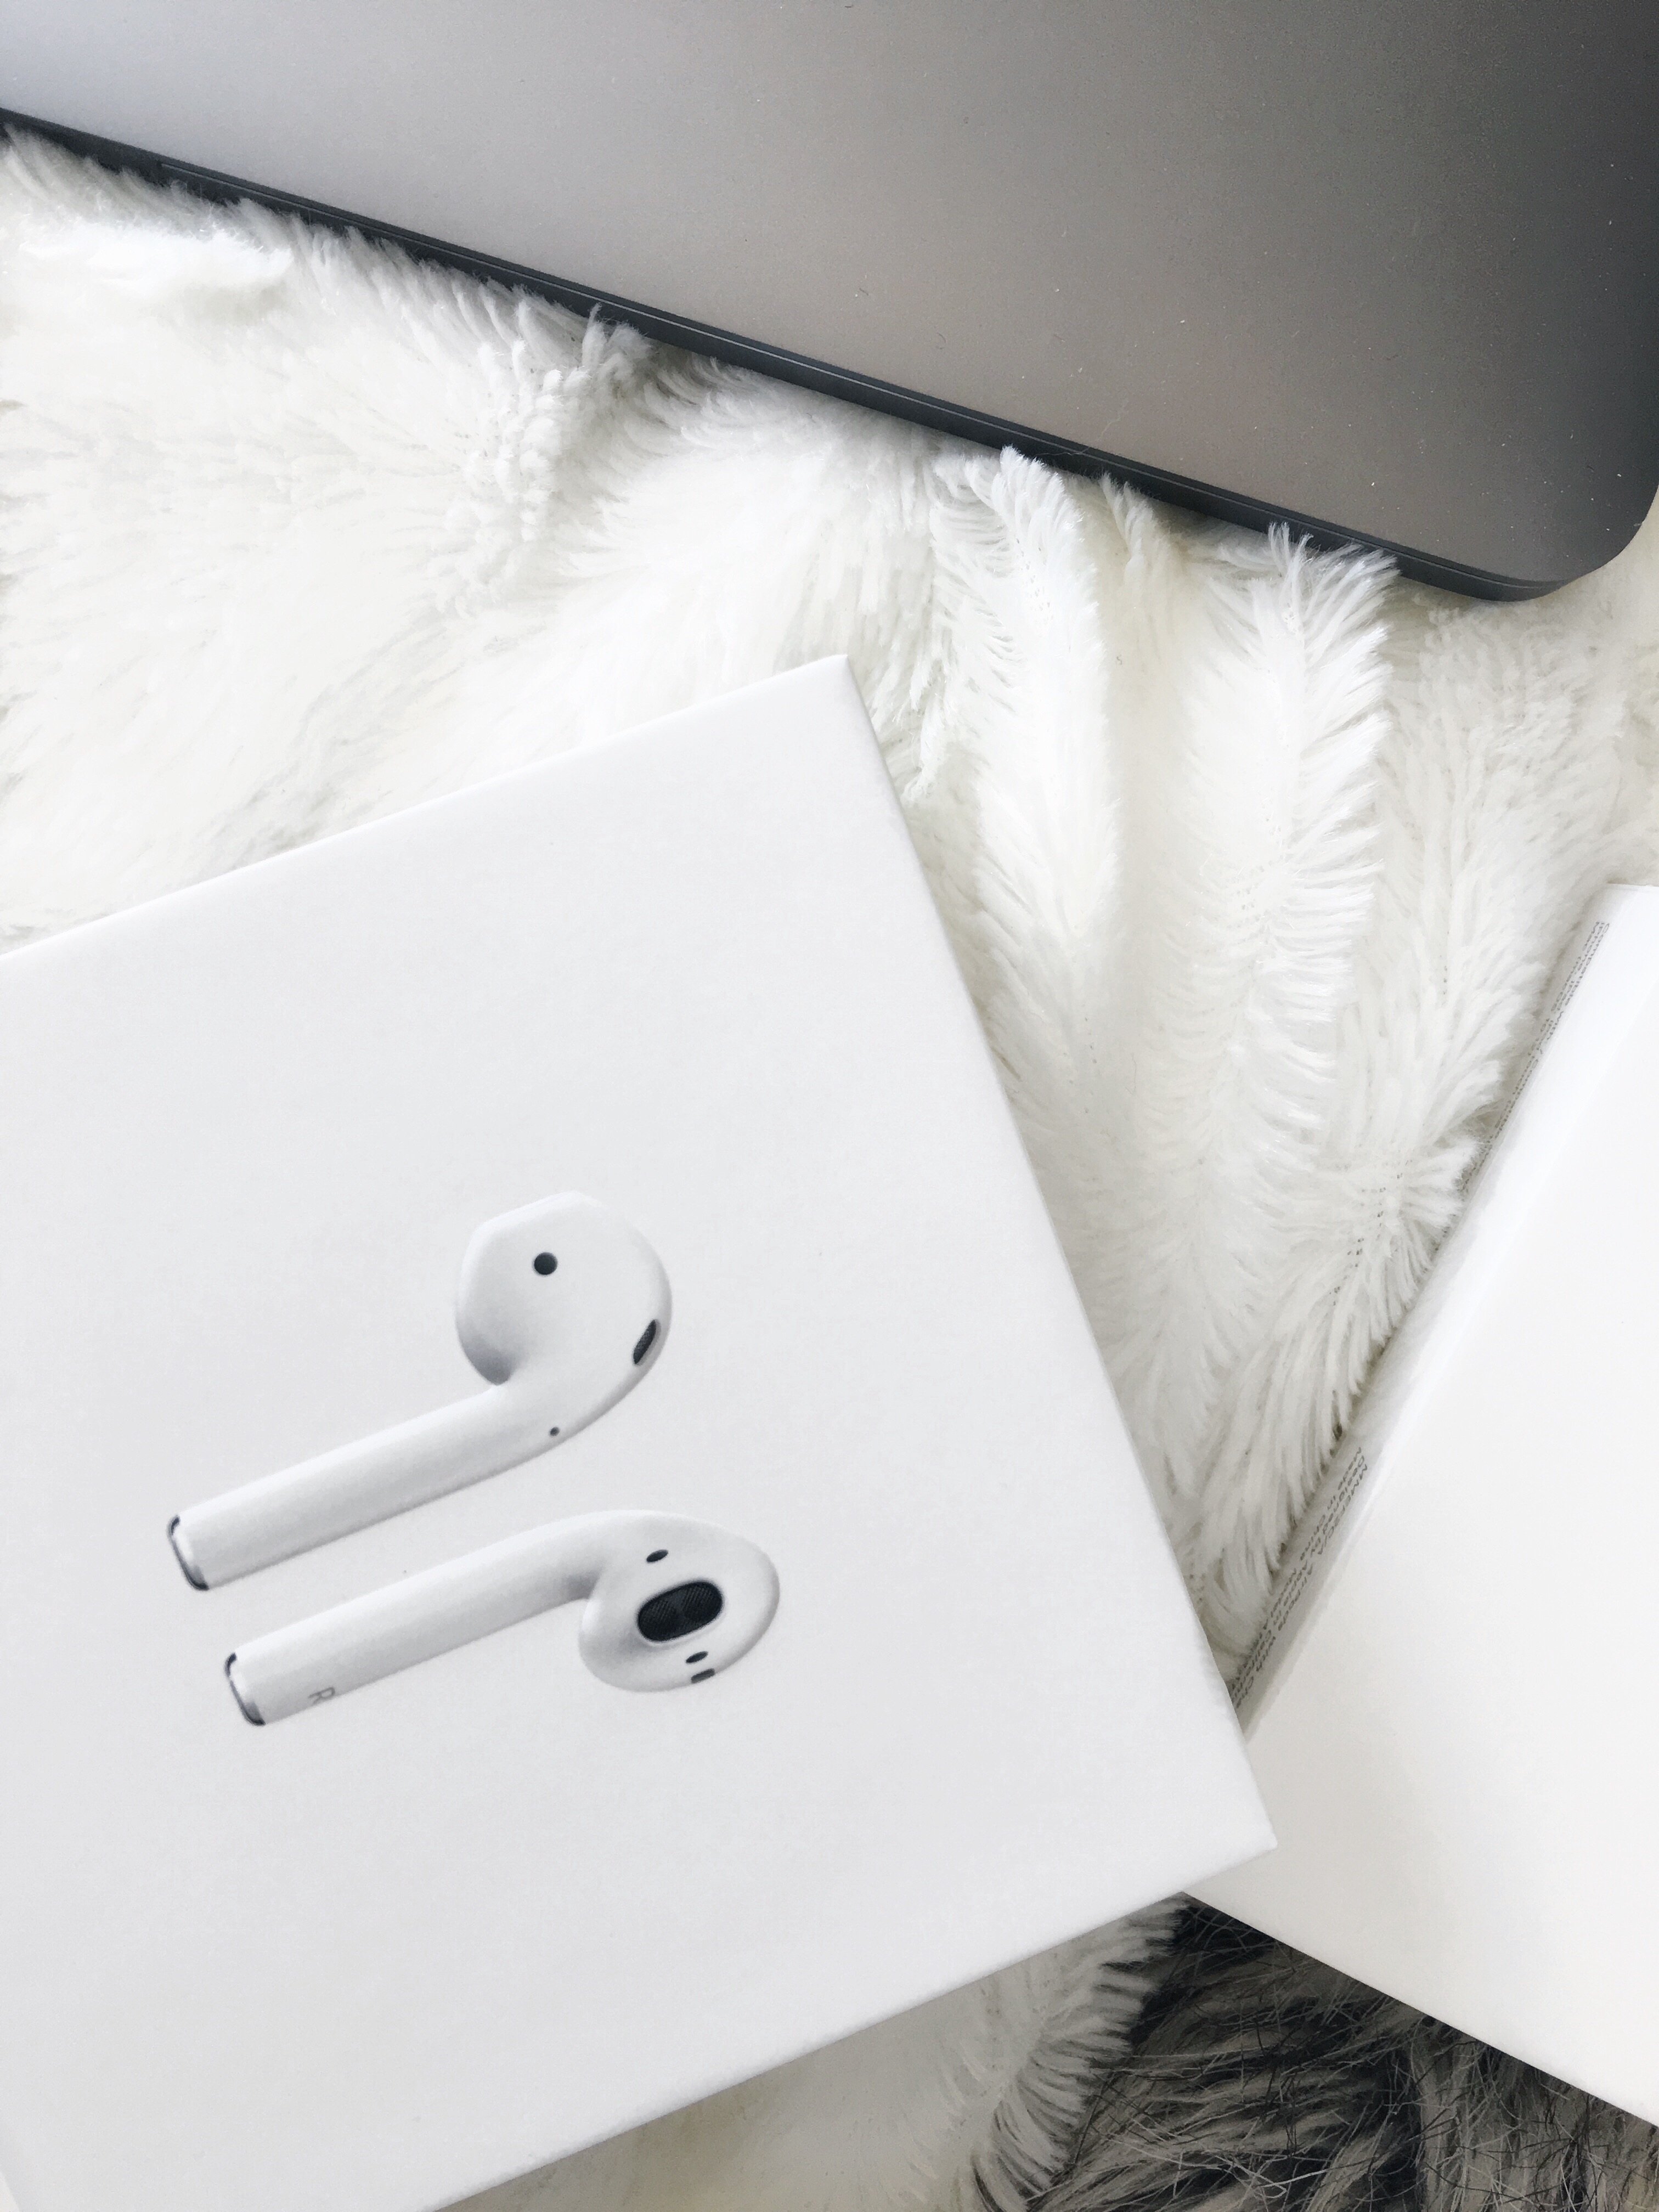 Drea Marie shares whether Apple's AirPods are worth it or not. She breaks them down FOR REAL into pros and cons.